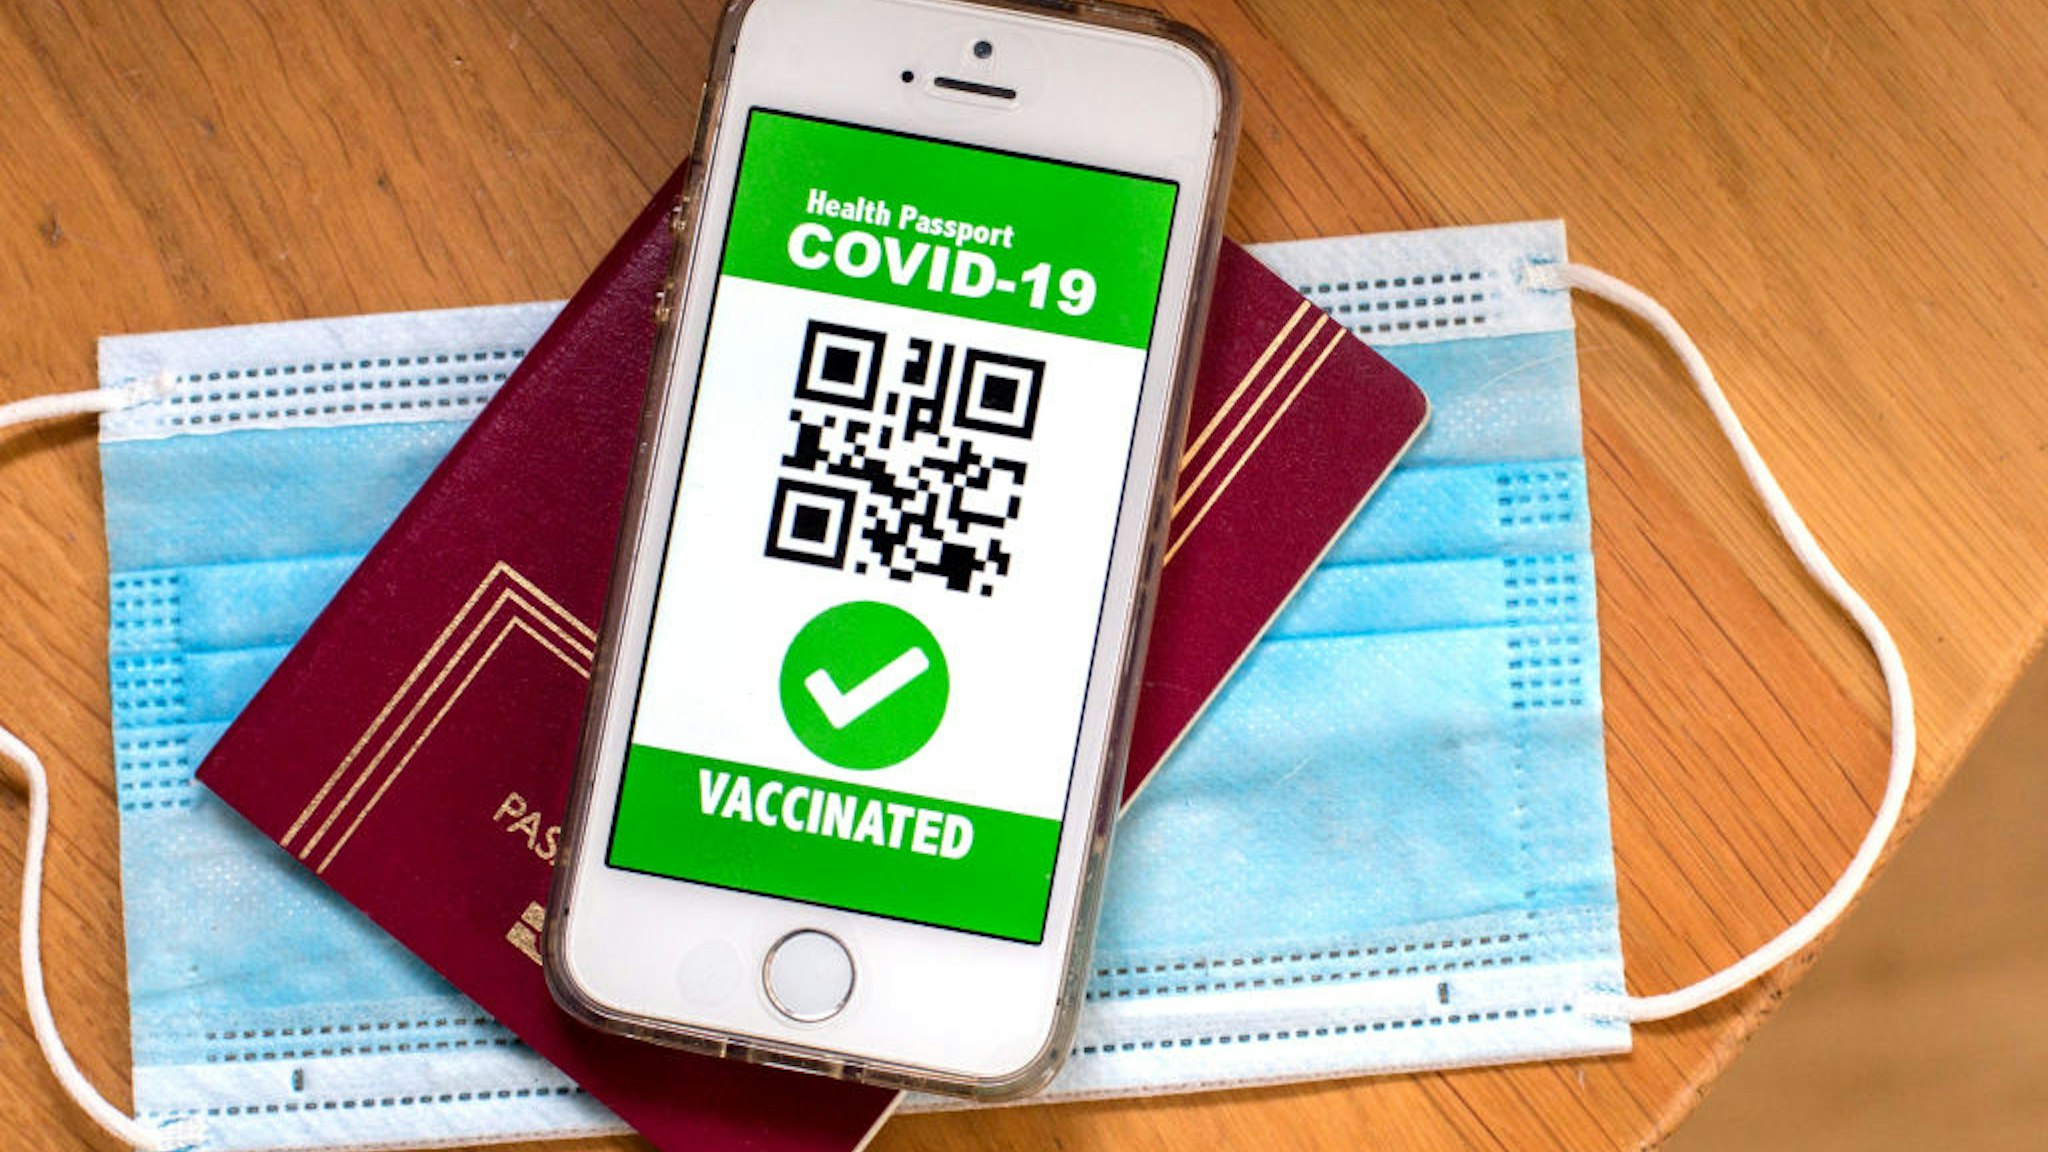 SPAIN - 2021/04/09: In this photo illustration a symbolic COVID-19 health passport seen displayed on a smartphone screen on top of a passport and a protective facemask. (Photo Illustration by Thiago Prudencio/SOPA Images/LightRocket via Getty Images)